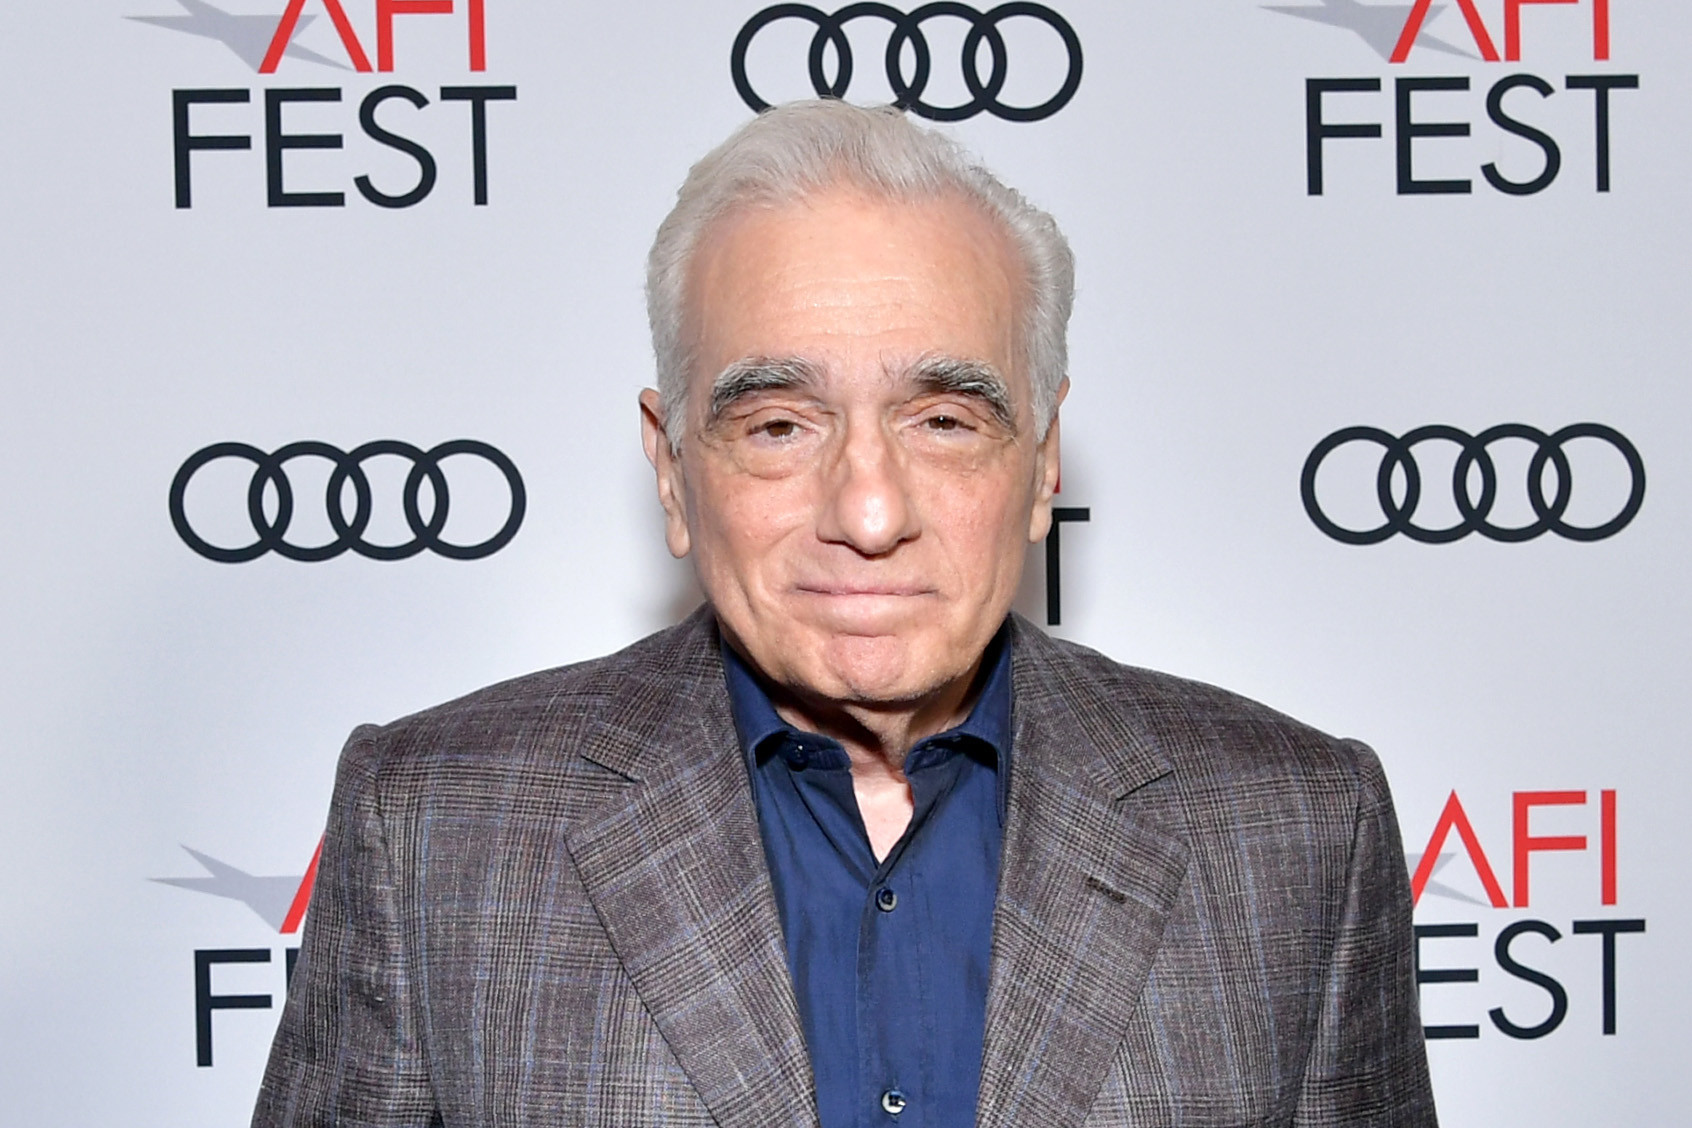 Martin Scorsese expected to begin filming ‘Killers of the Flower Moon’ in March: report